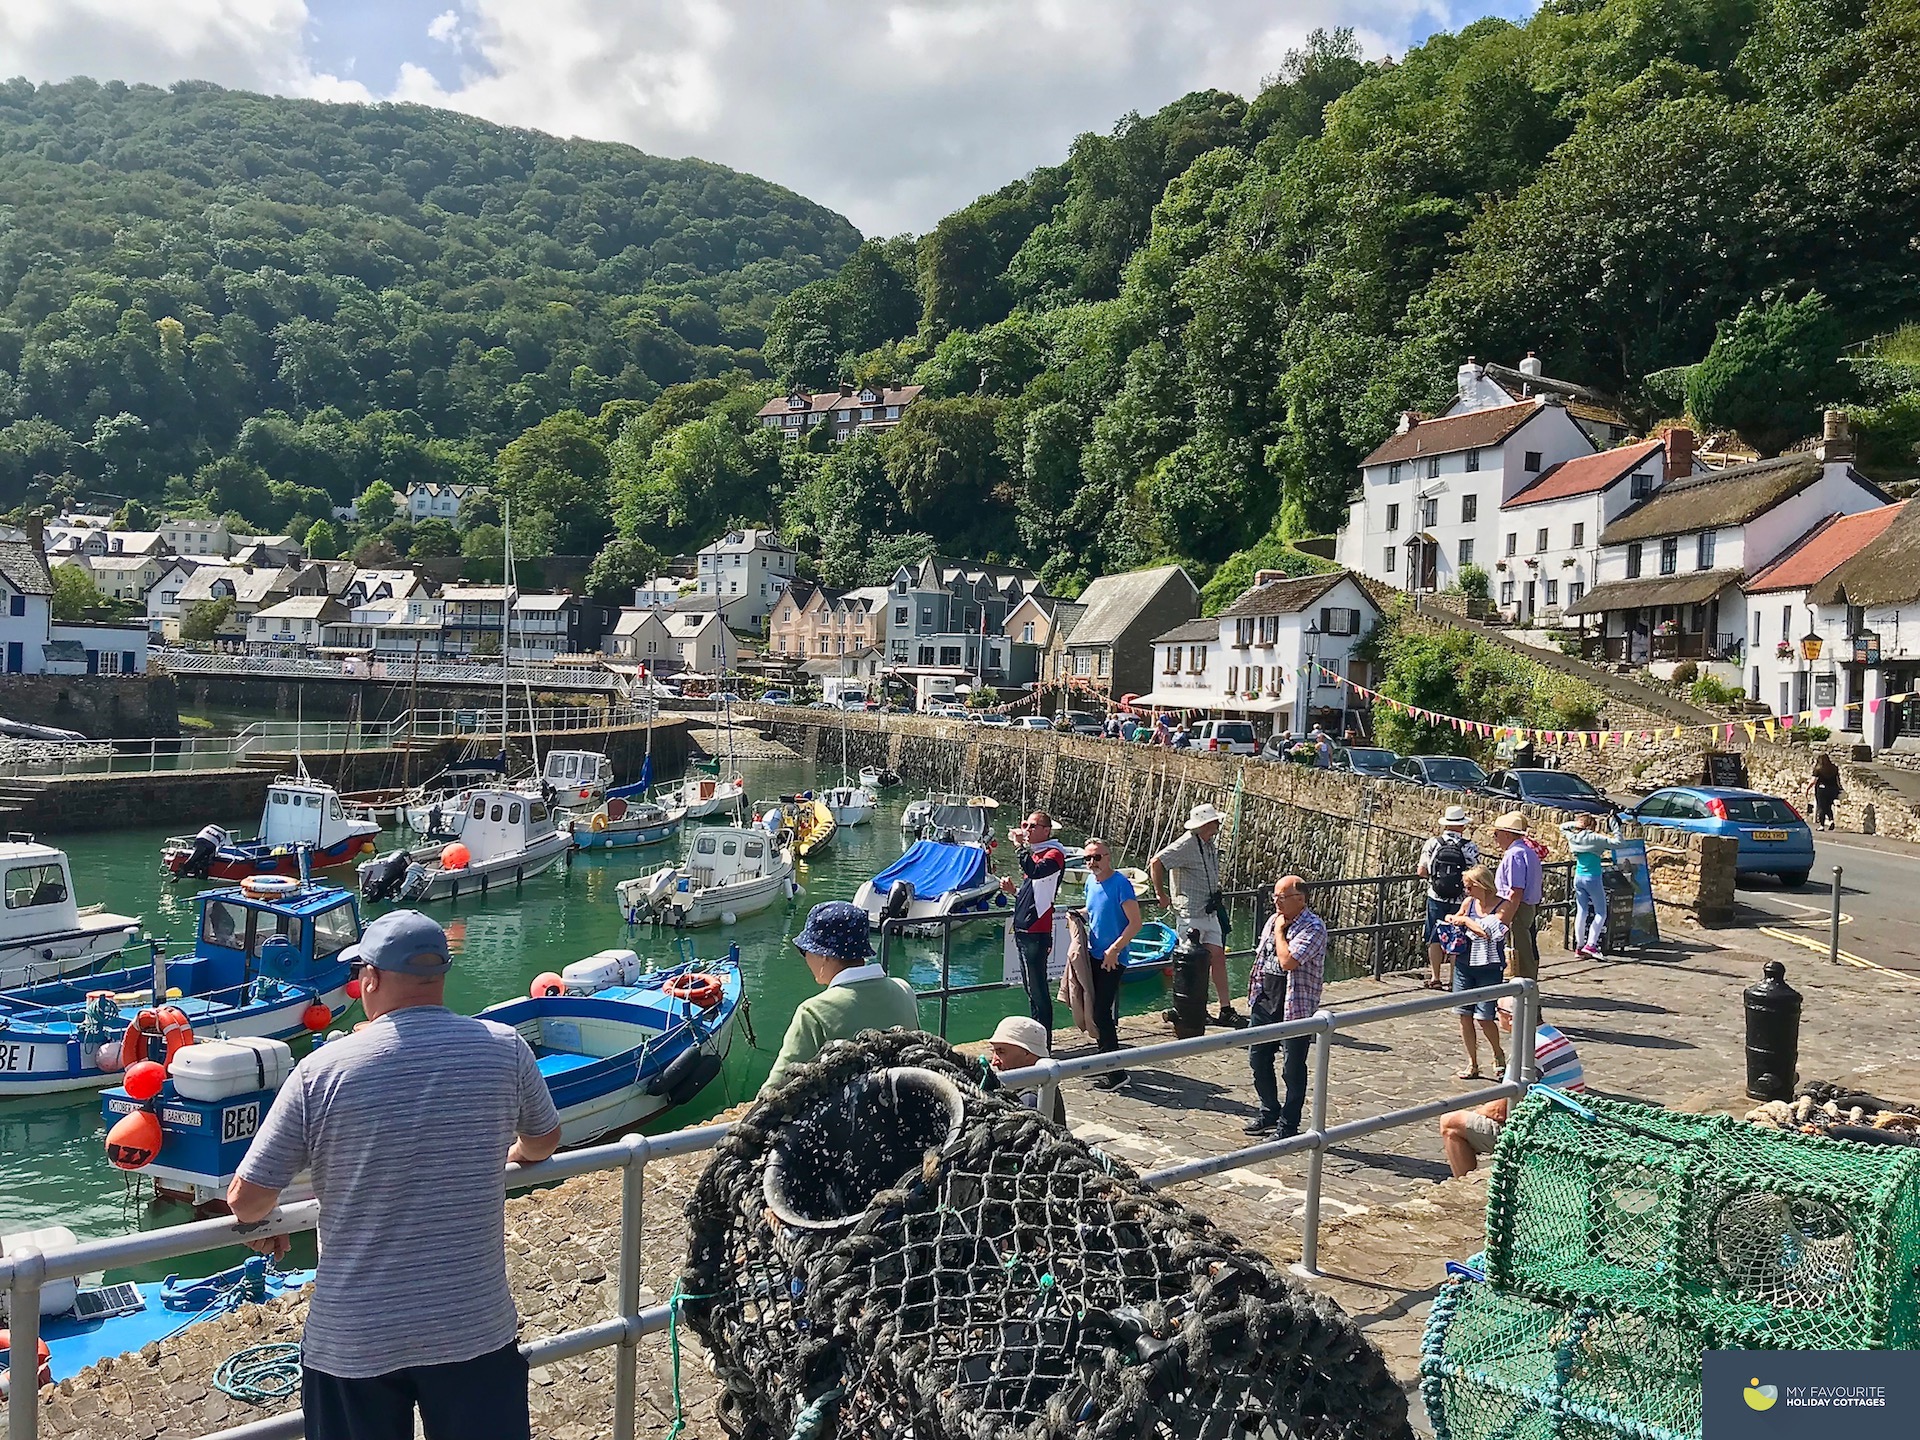 Lynmouth harbour full of pleasure and fishing boats. In the foreground is a stack of lobster pots. Little coottages and shops line the harbour edge behind a steep backdrop of trees.